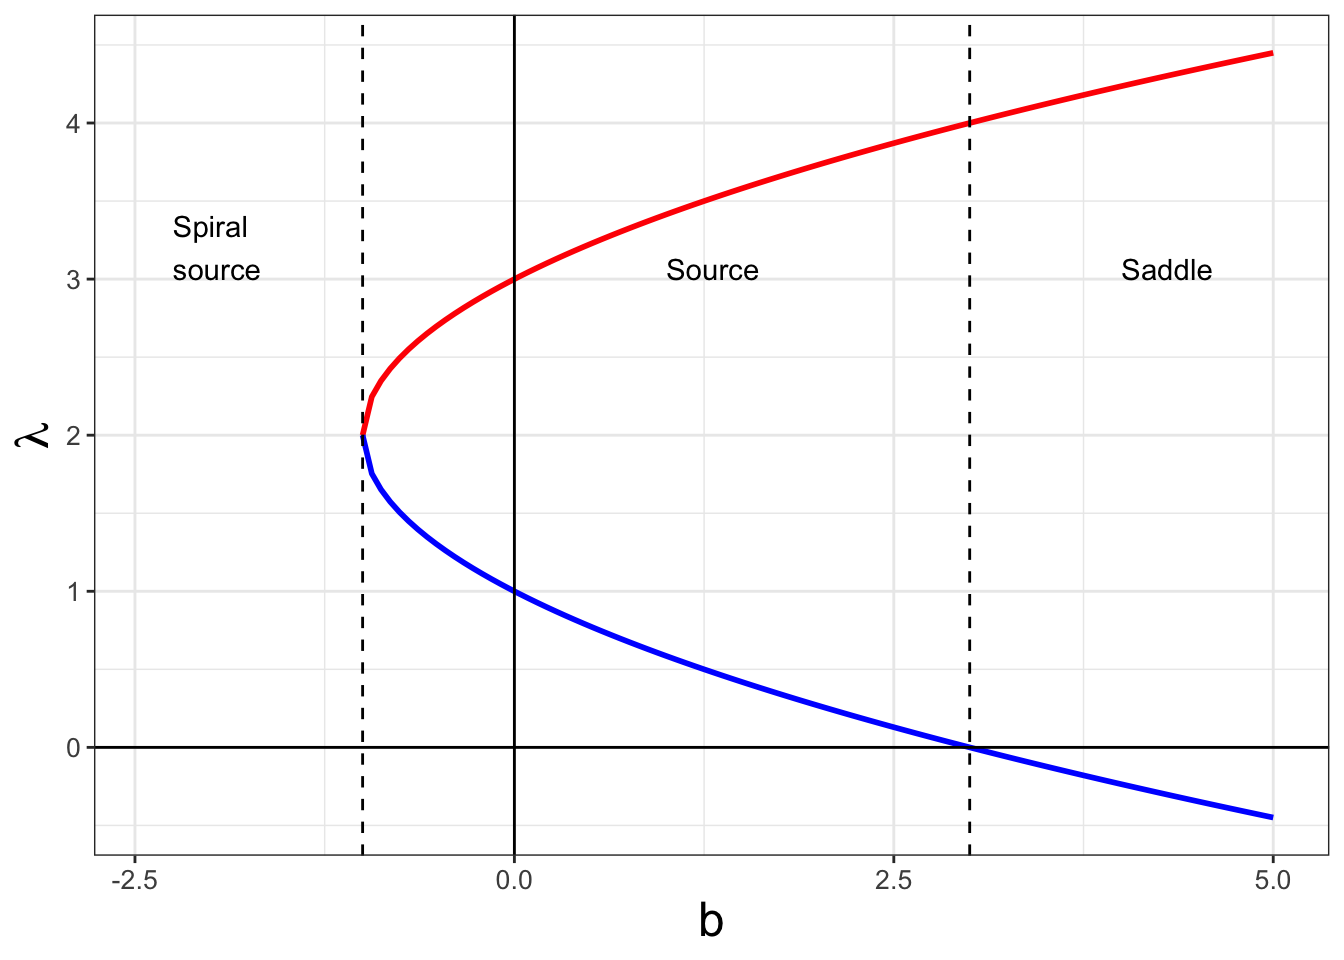 Bifurcation diagram for Equation \@ref(eq:b-bifurc-20). The vertical axis shows the value of the eigenvalues $\lambda$ (red and blue curves) as a function of the parameter $b$. The annotations represent the stability of the original equilibrium solution.